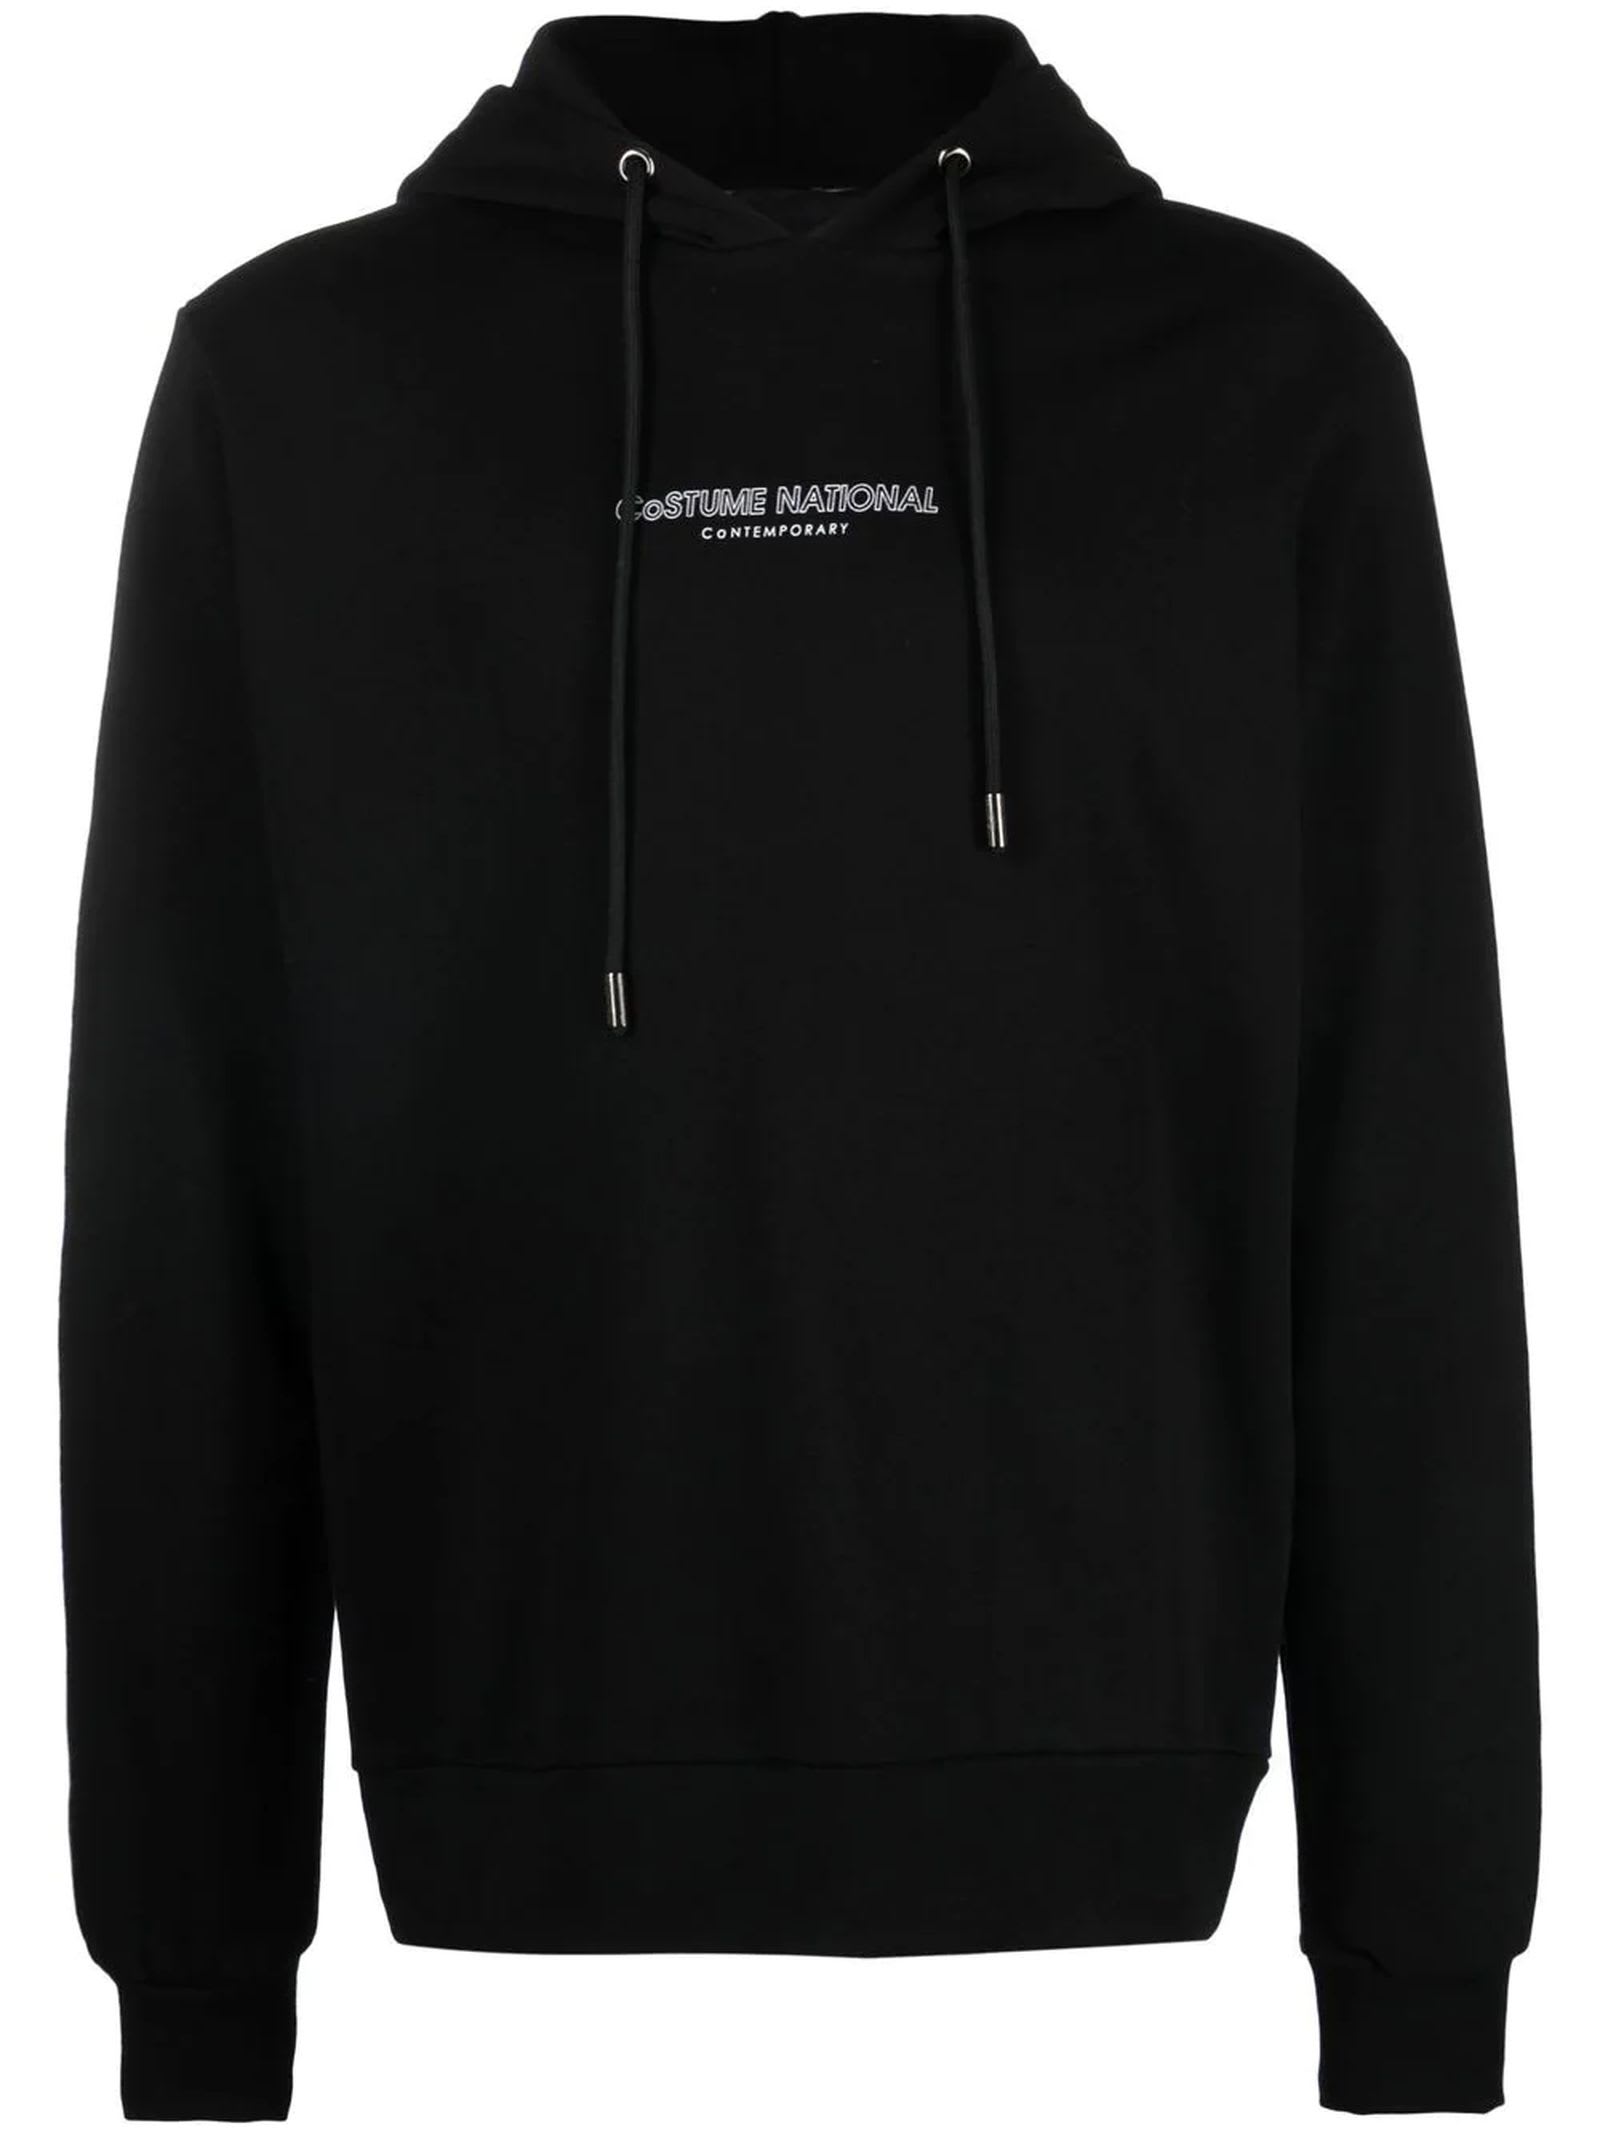 CoSTUME NATIONAL CONTEMPORARY Black Cotton Hoodie